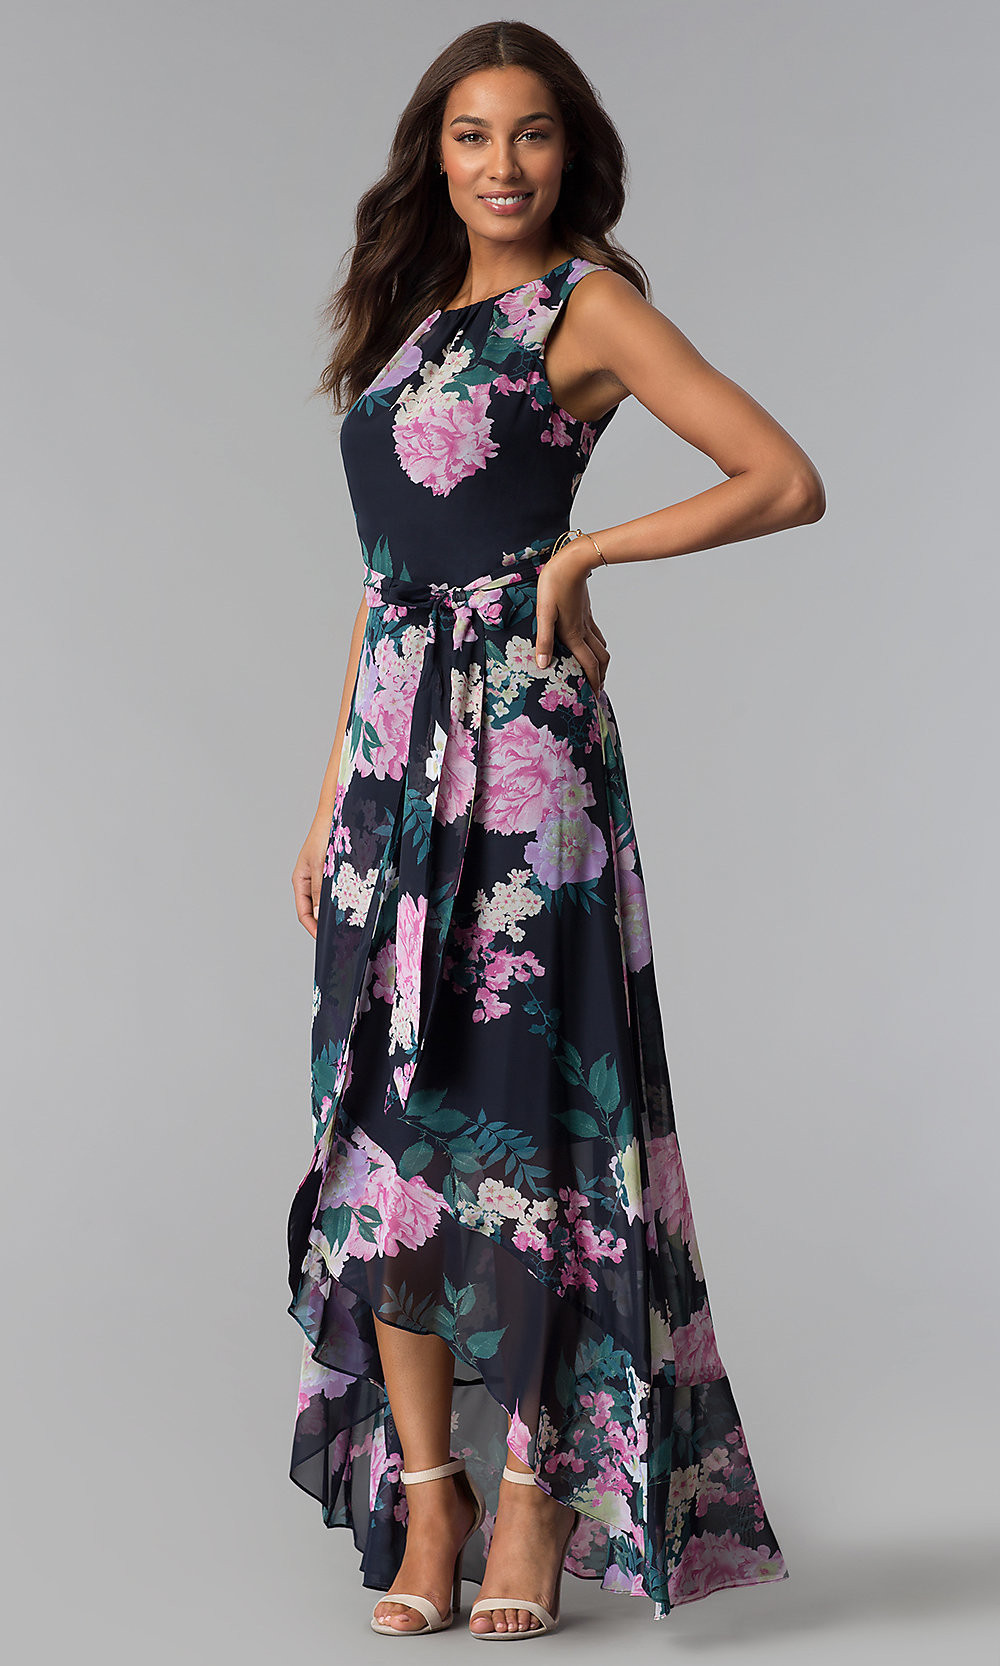 Wedding Guest Gowns
 Floral Print Navy High Low Wedding Guest Dress